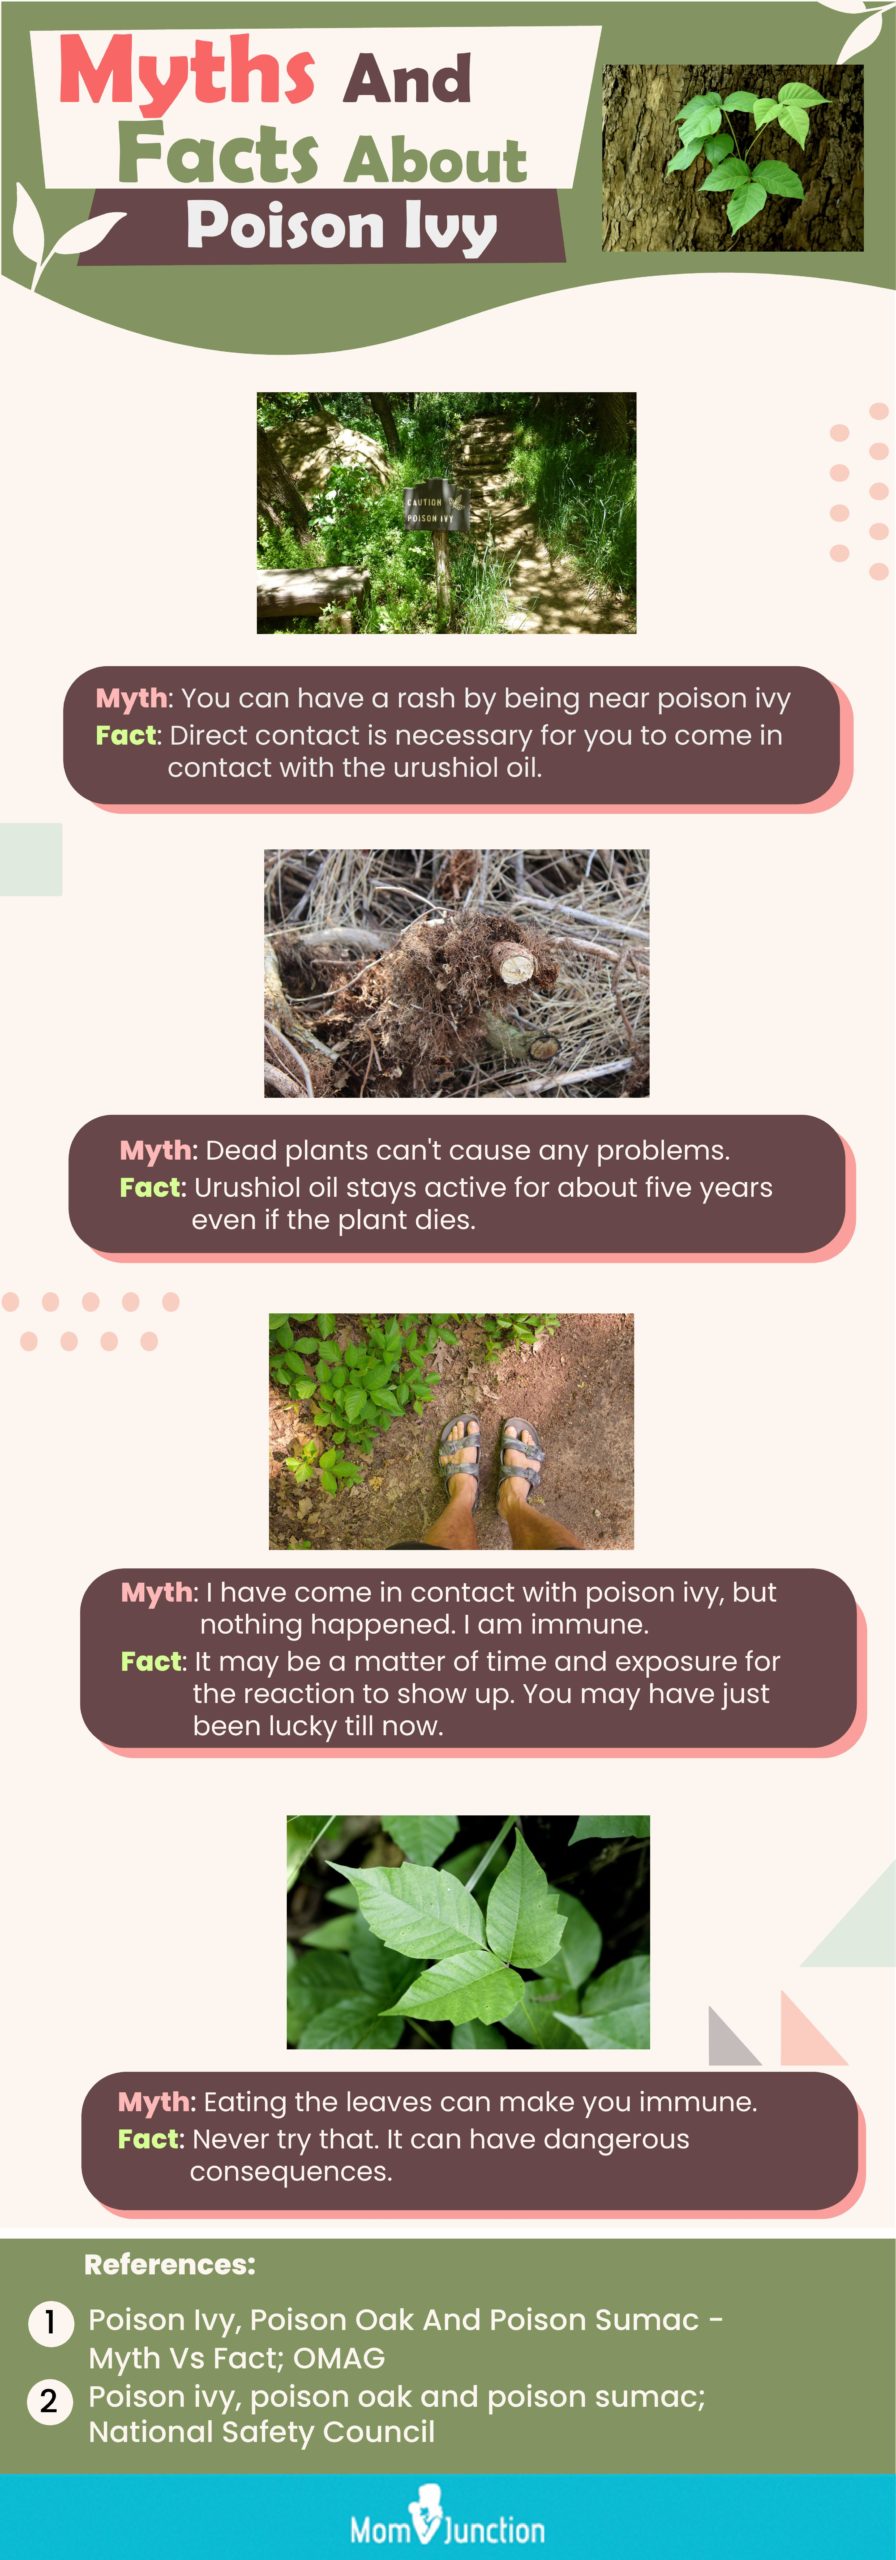 myths and facts about poison ivy (infographic)